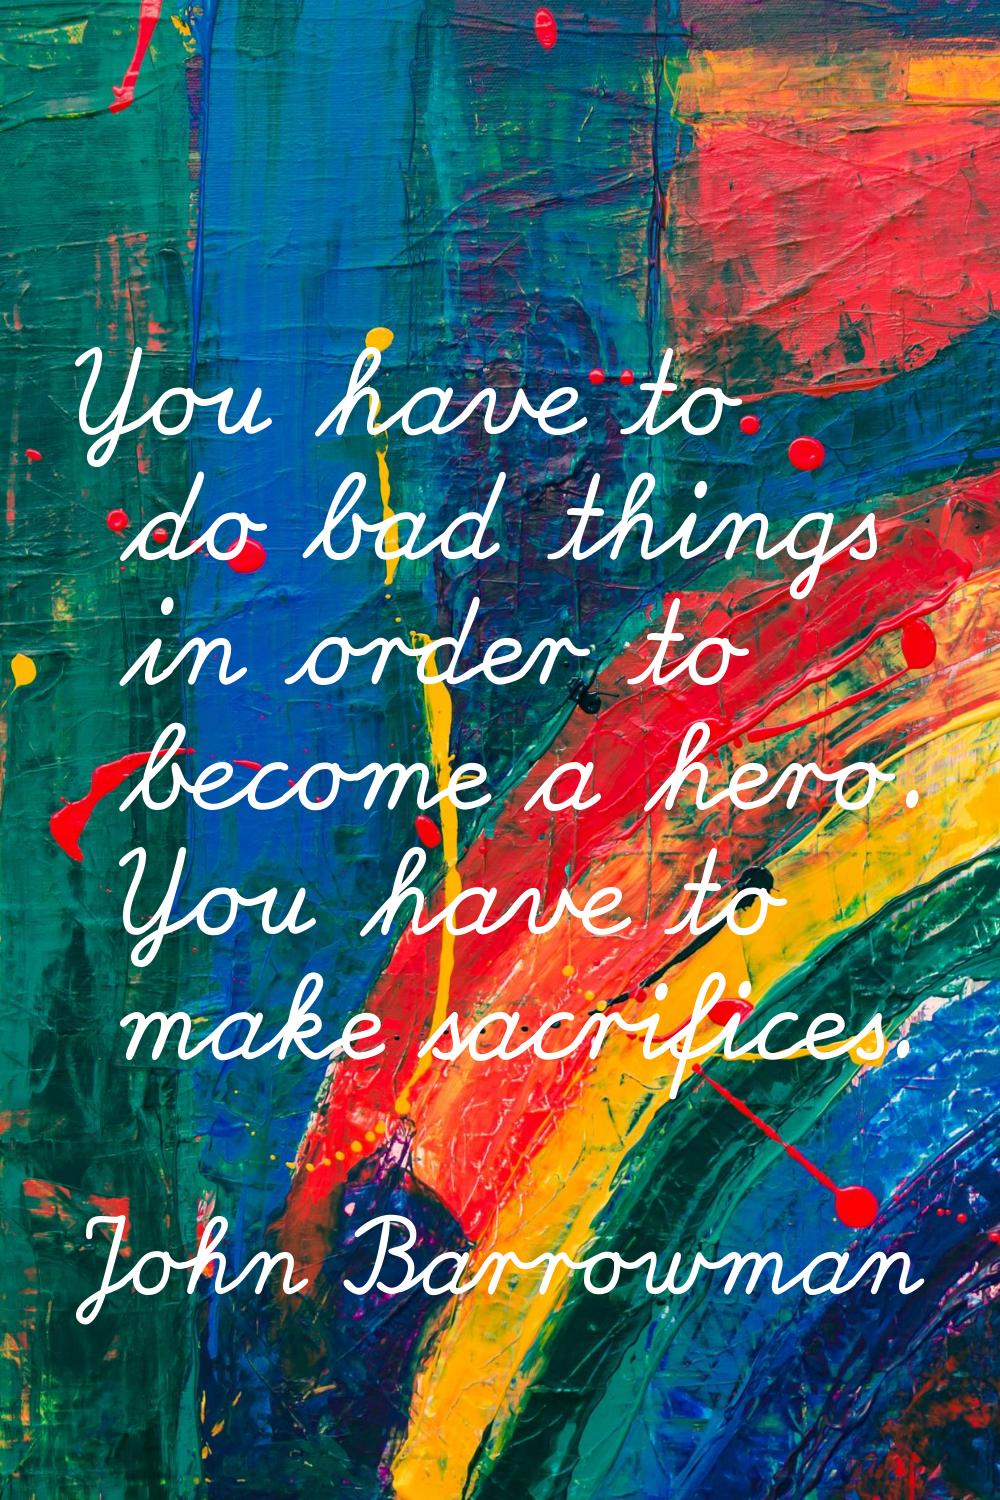 You have to do bad things in order to become a hero. You have to make sacrifices.